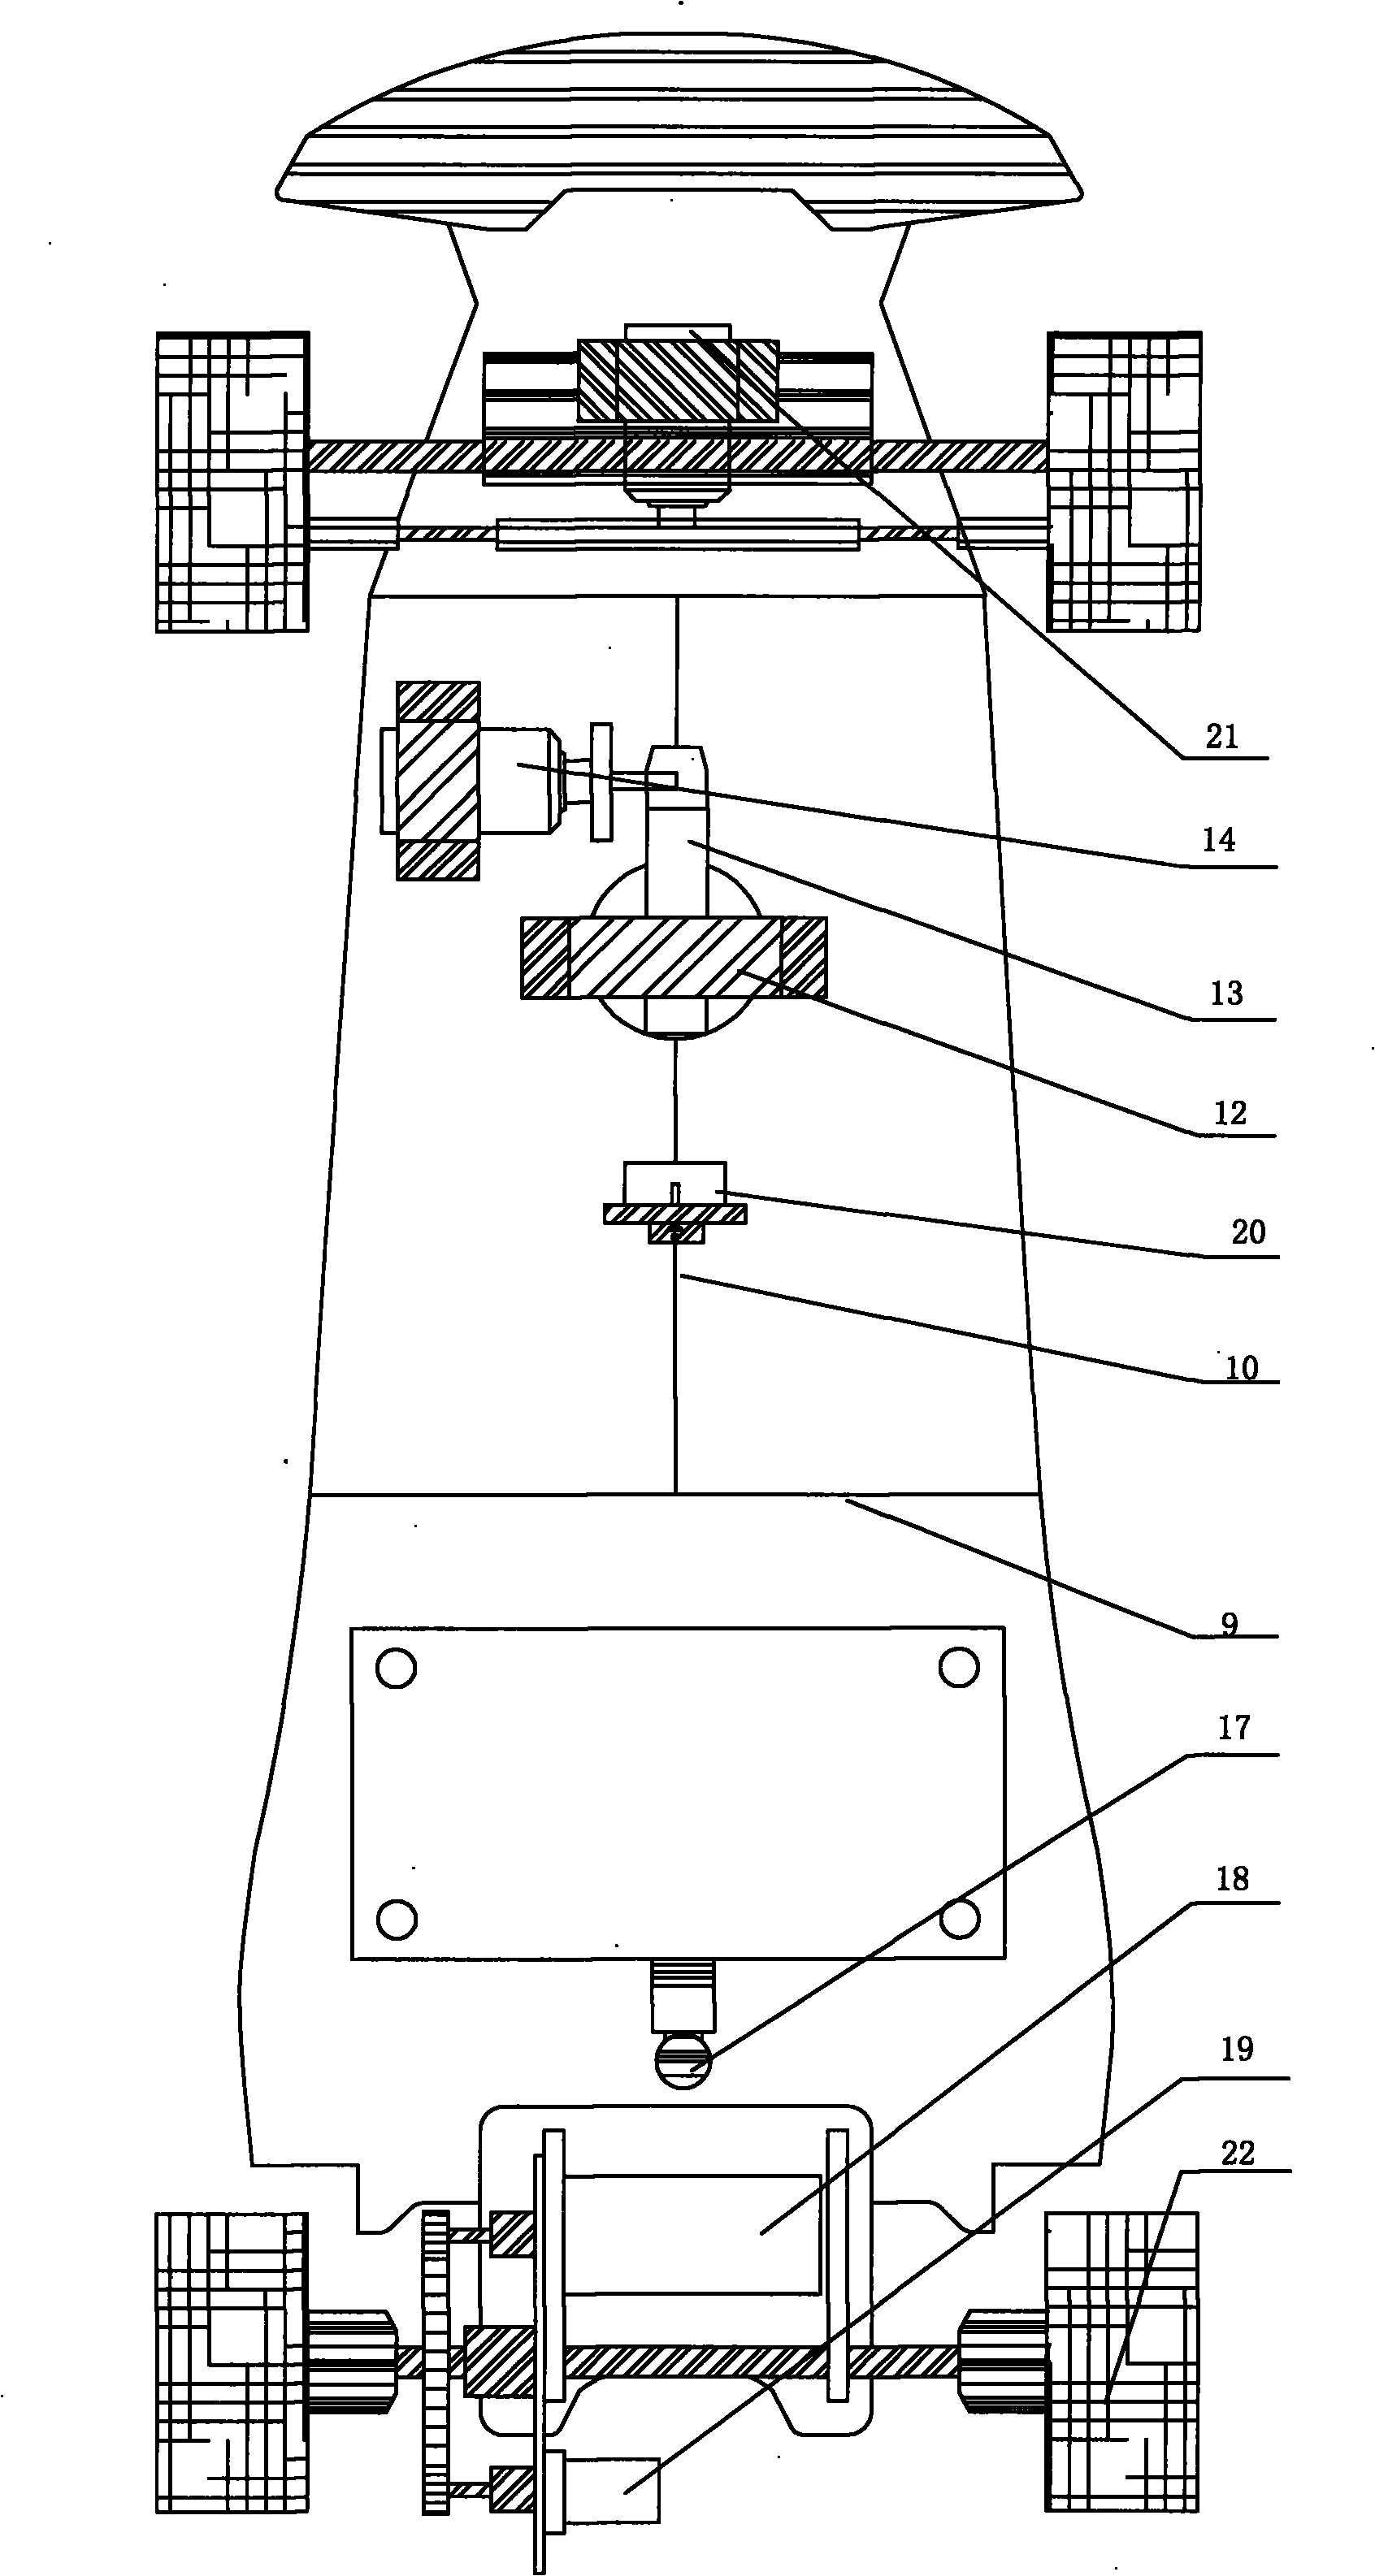 Control system of visual aid based ground advertisement clearance robot and control equipment thereof